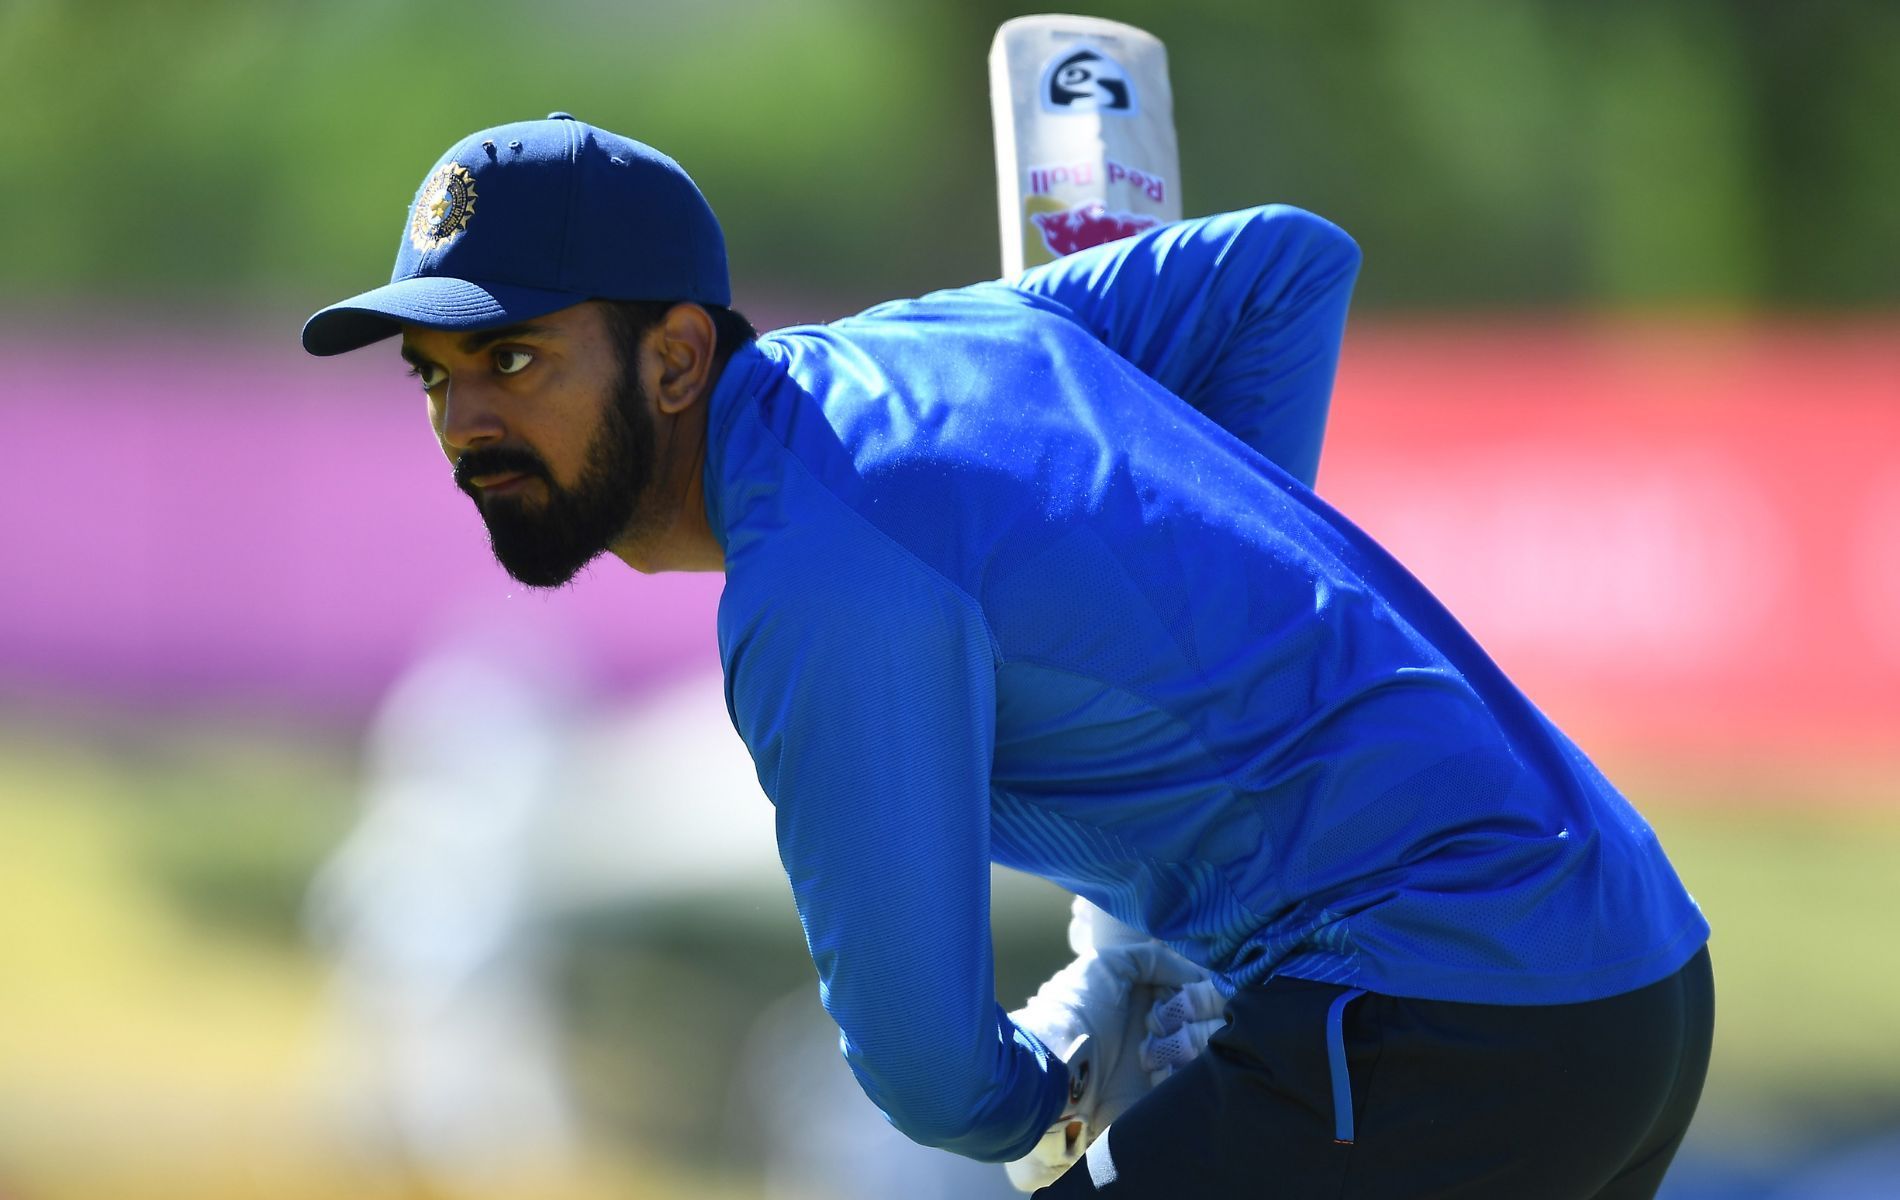 KL Rahul backed India to come back strong with the bat in the 2nd ODI vs South Africa.